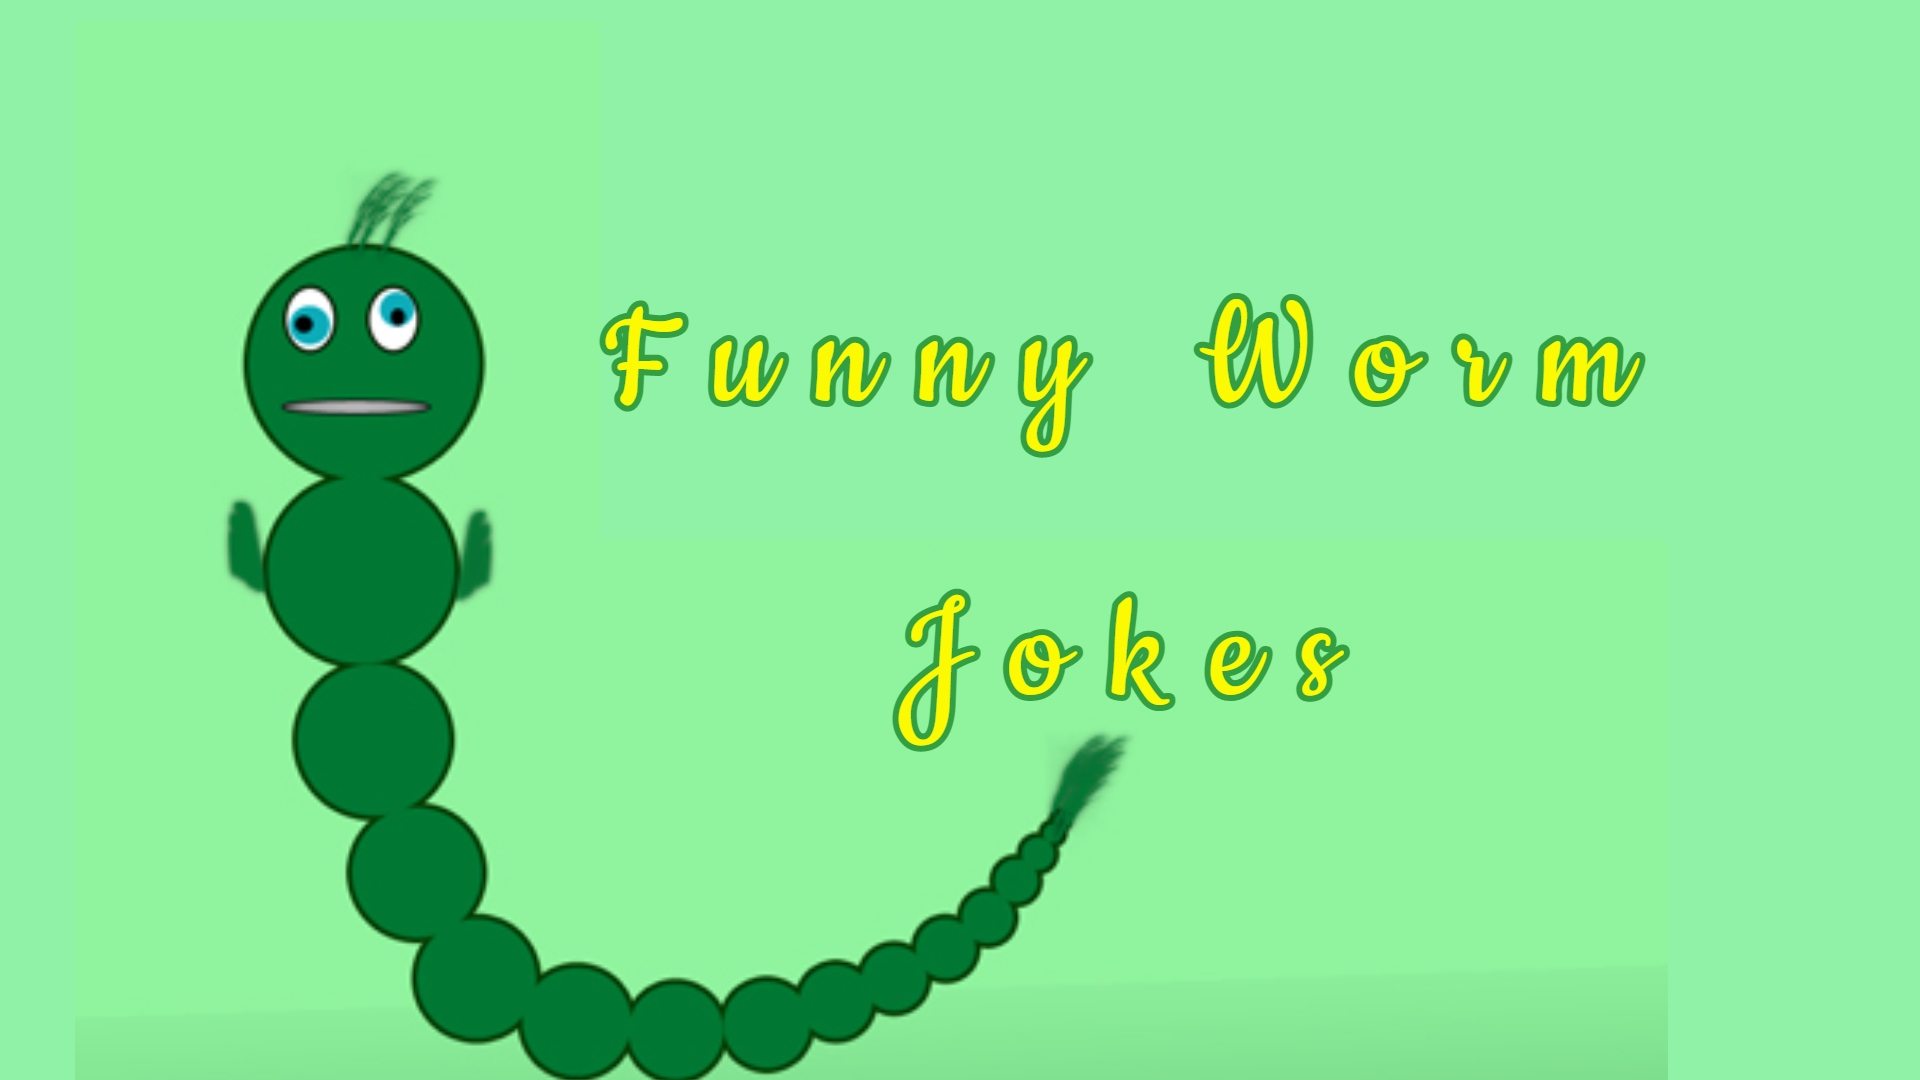 Hilarious Jokes About Worm